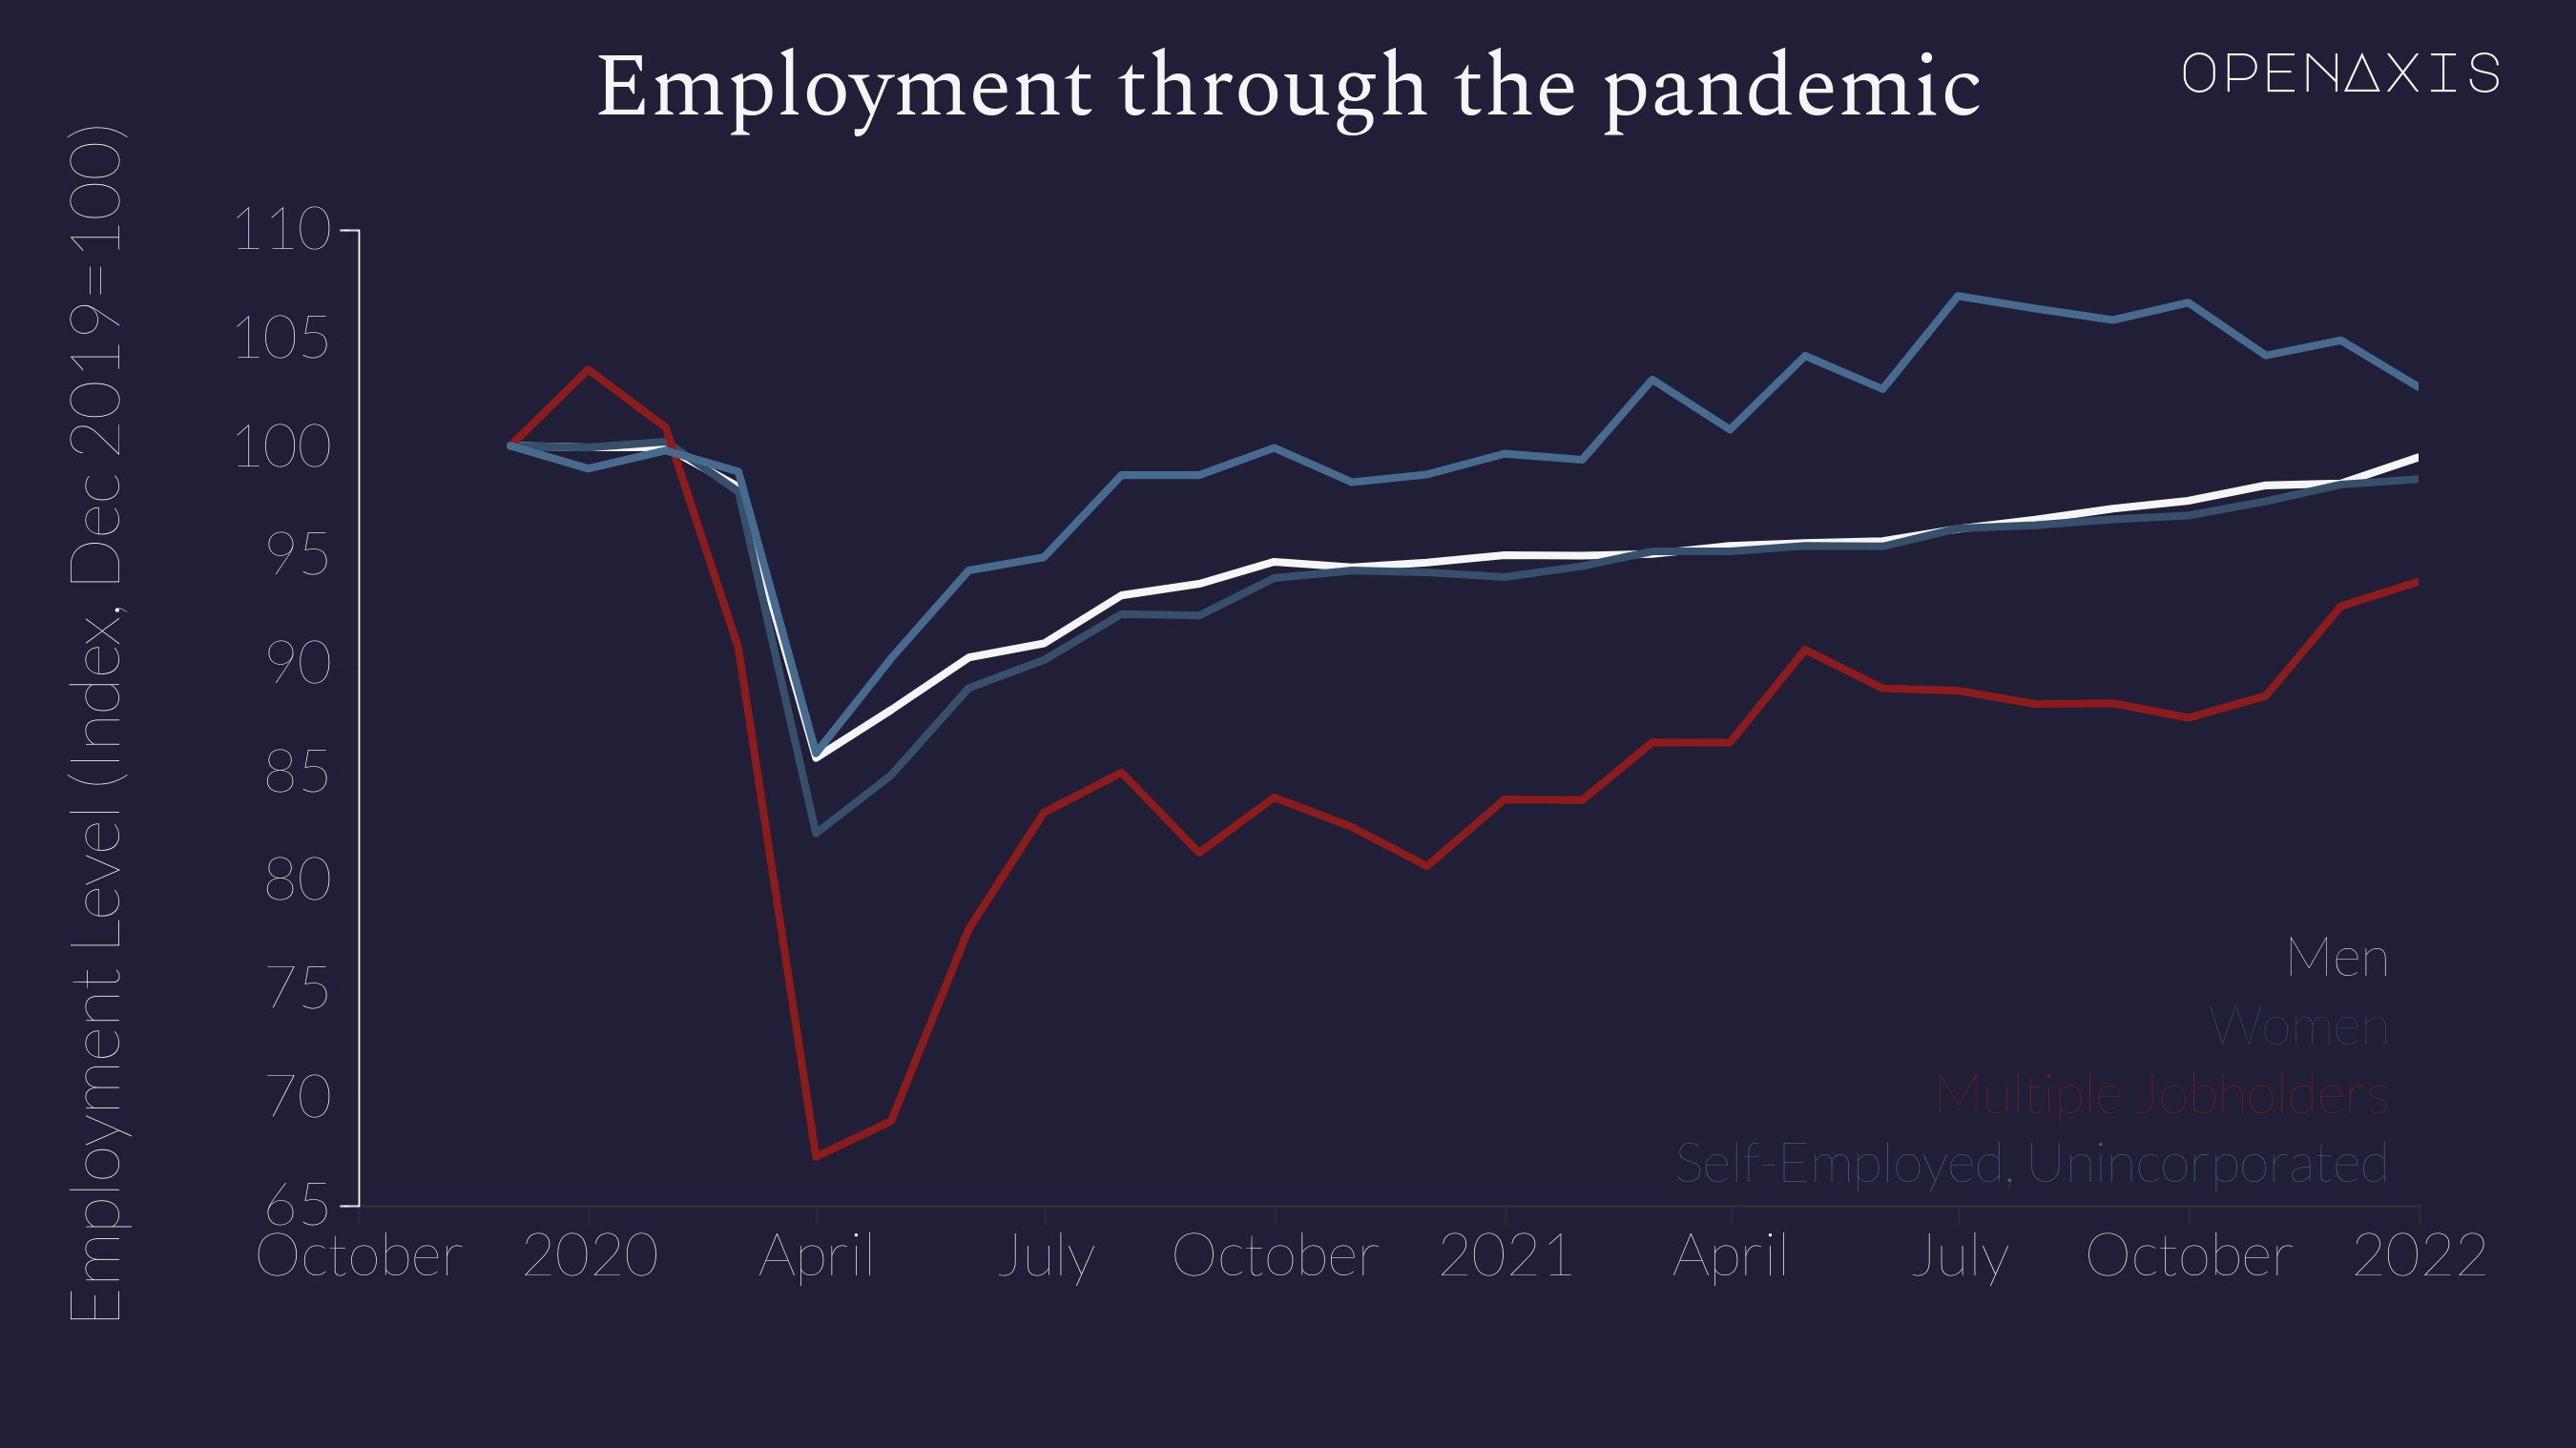 "Employment through the pandemic"